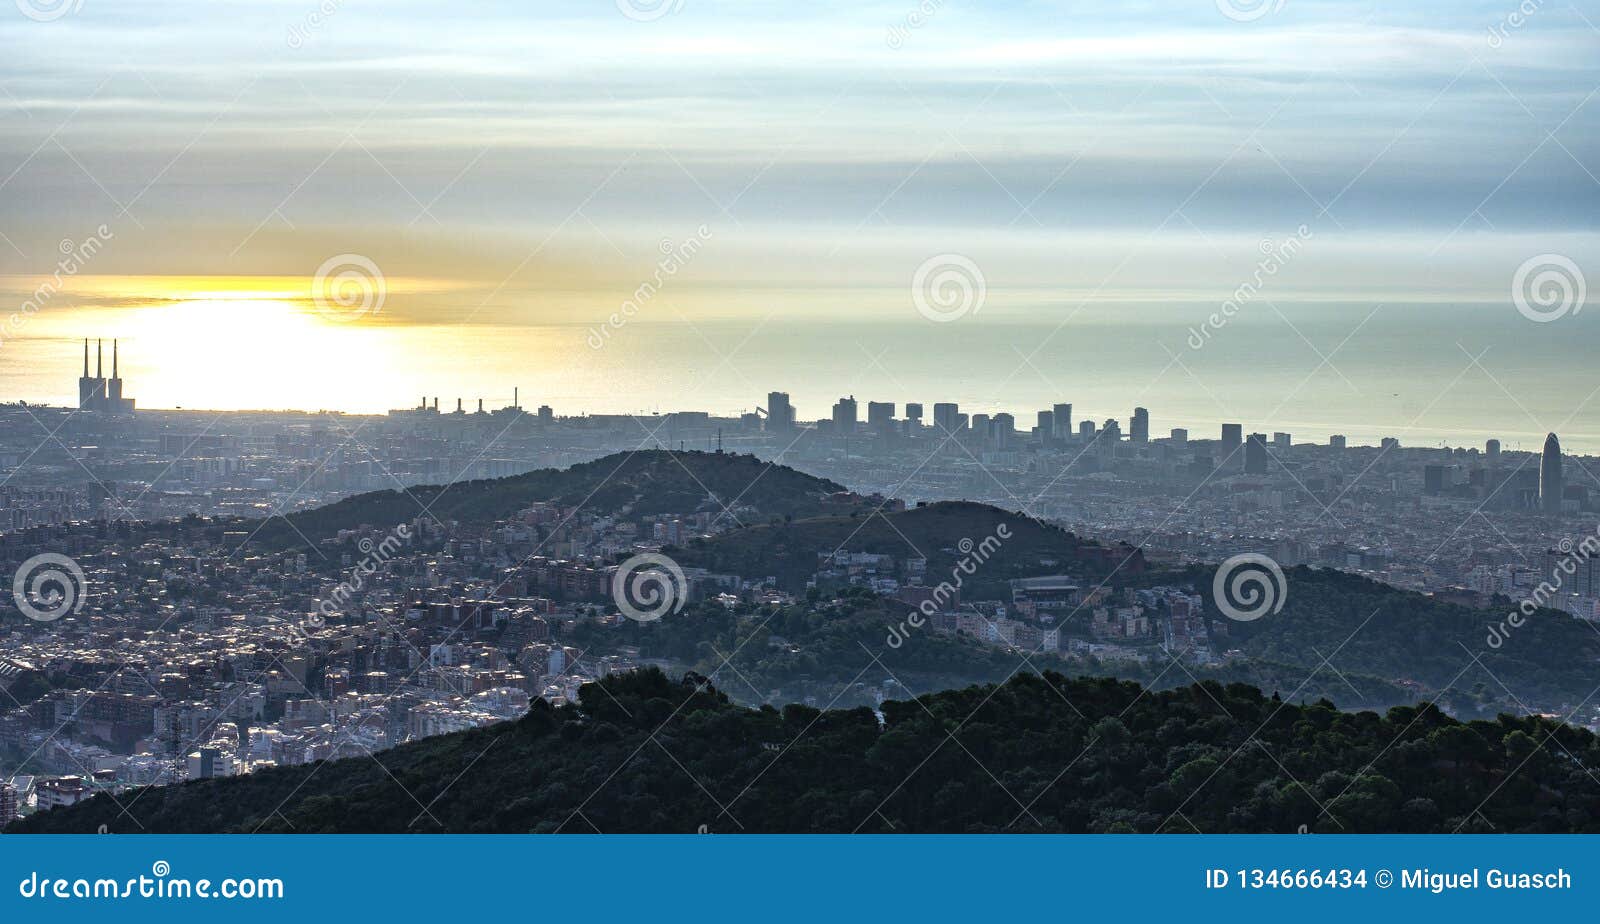 view of the city at sunrise